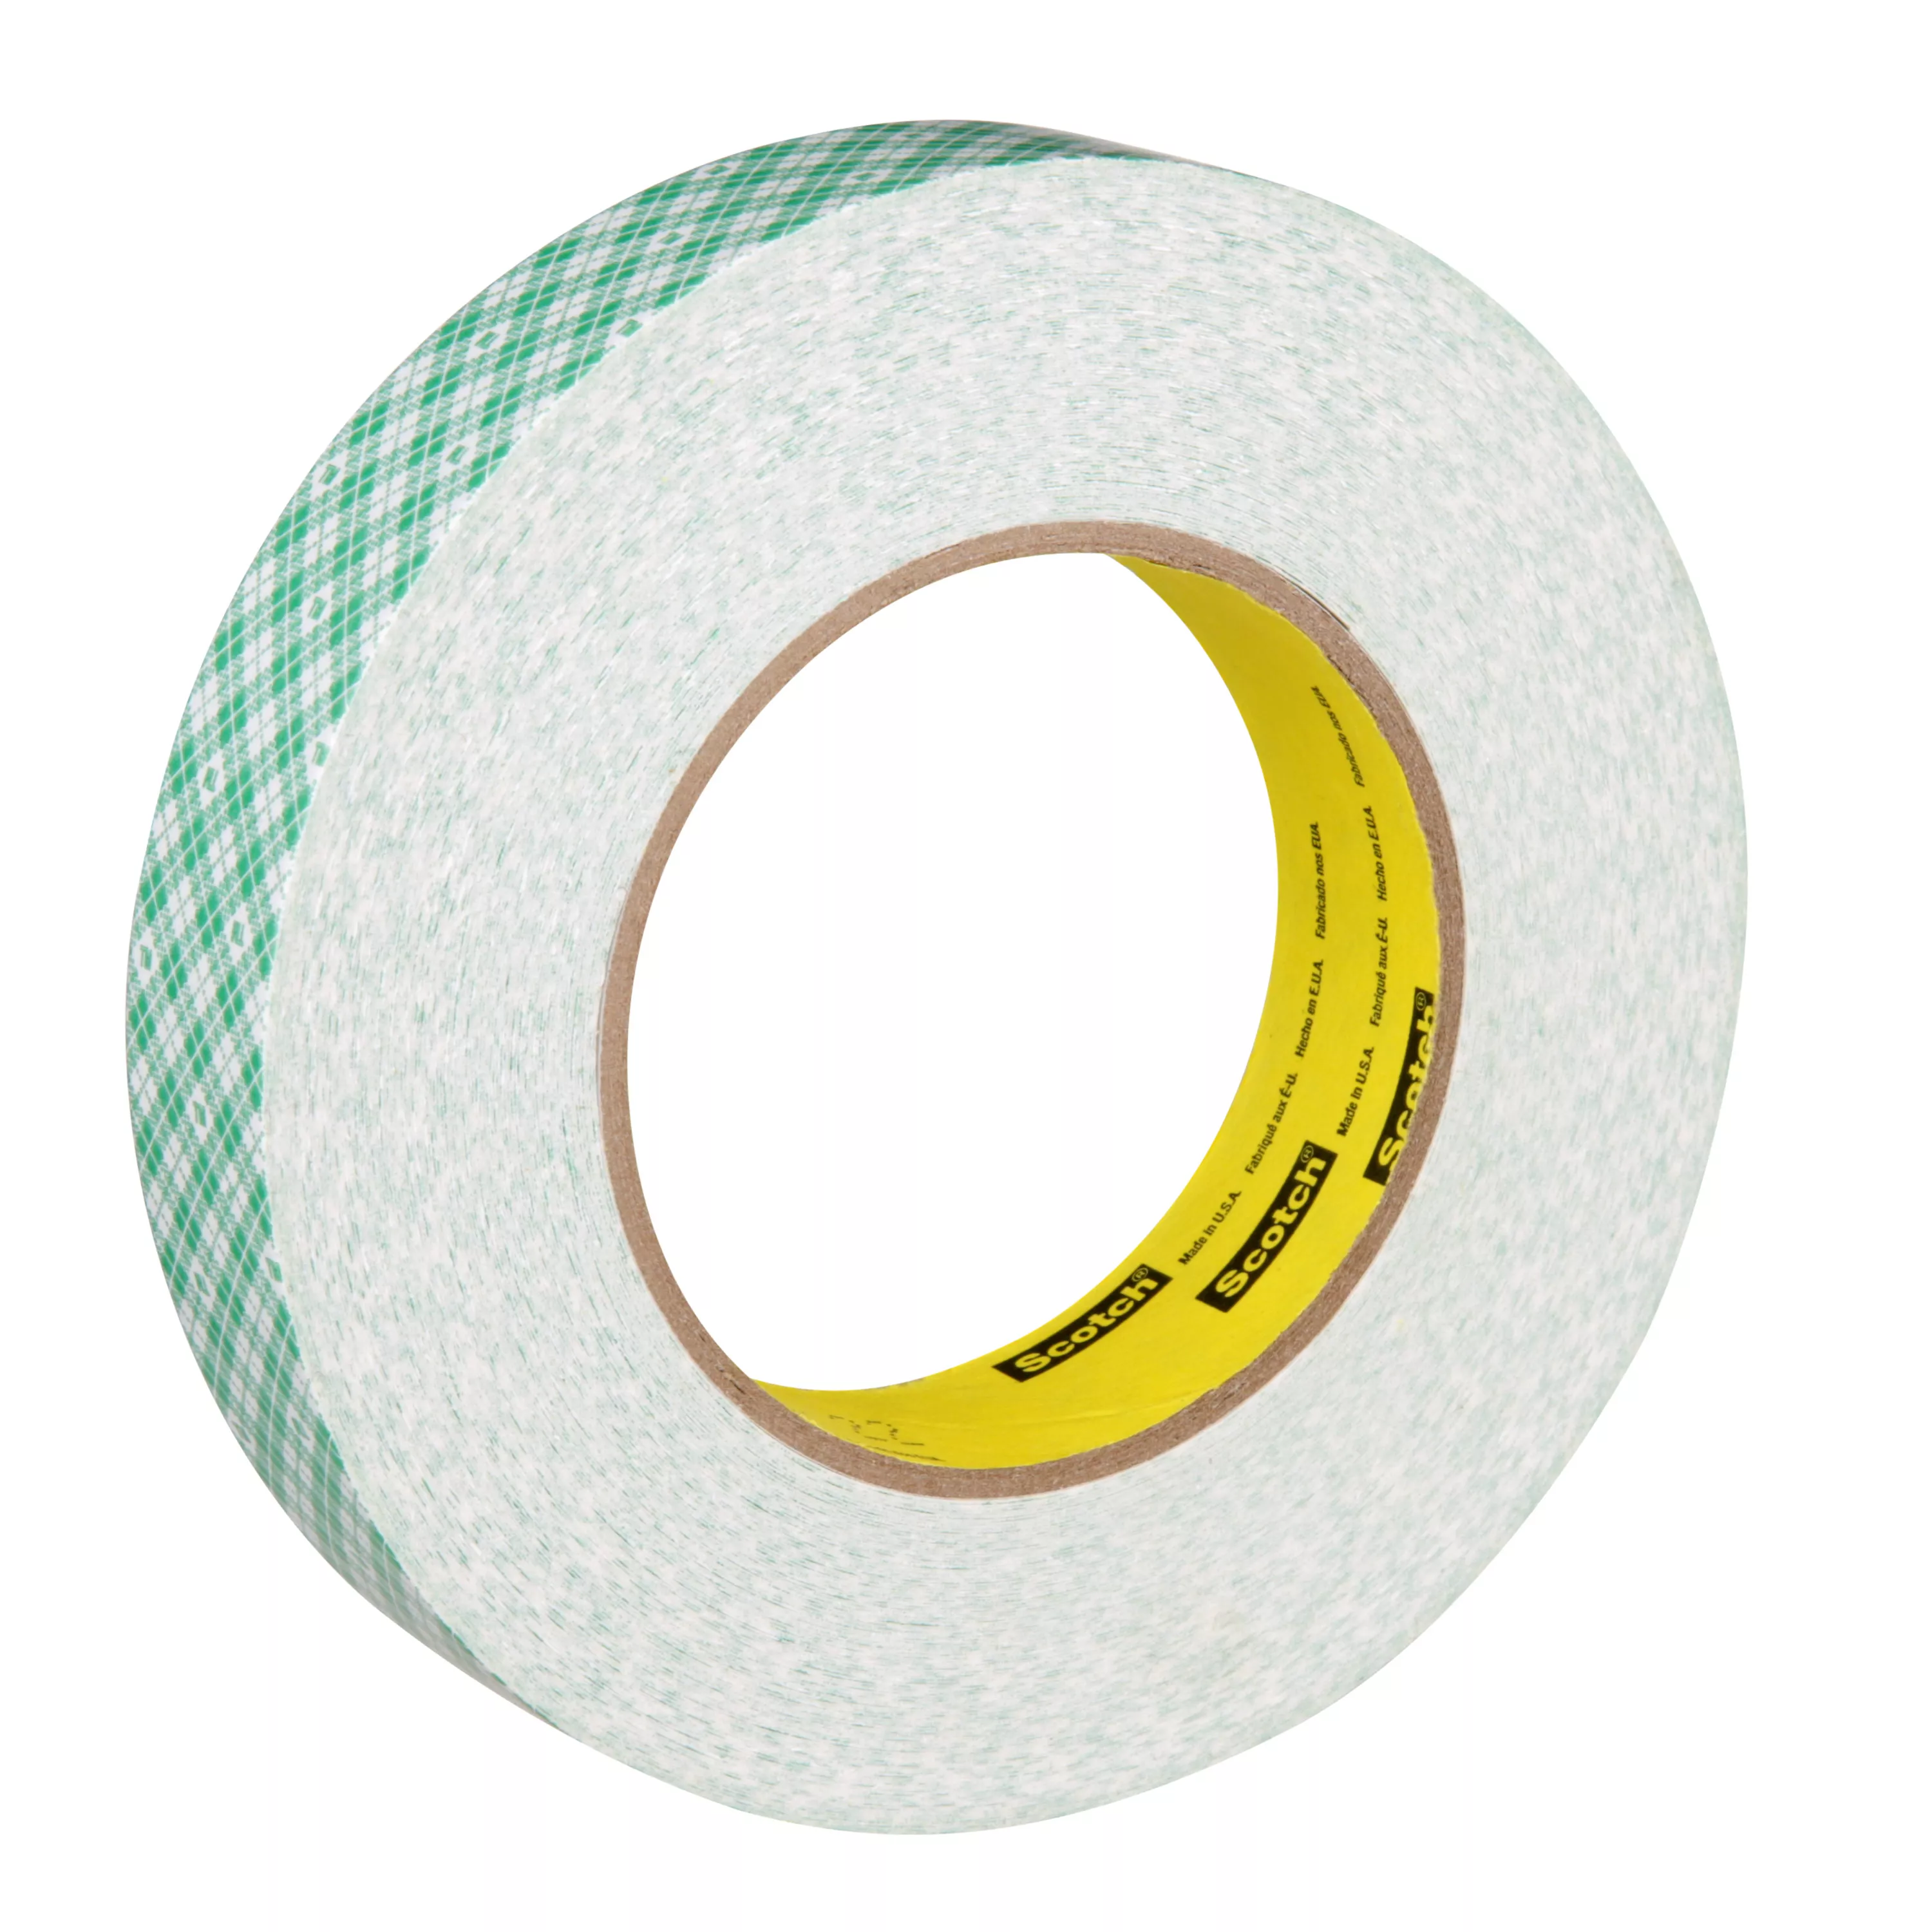 3M™ Double Coated Paper Tape 401M, Natural, 1 in x 36 yd, 9 mil, 36
Roll/Case